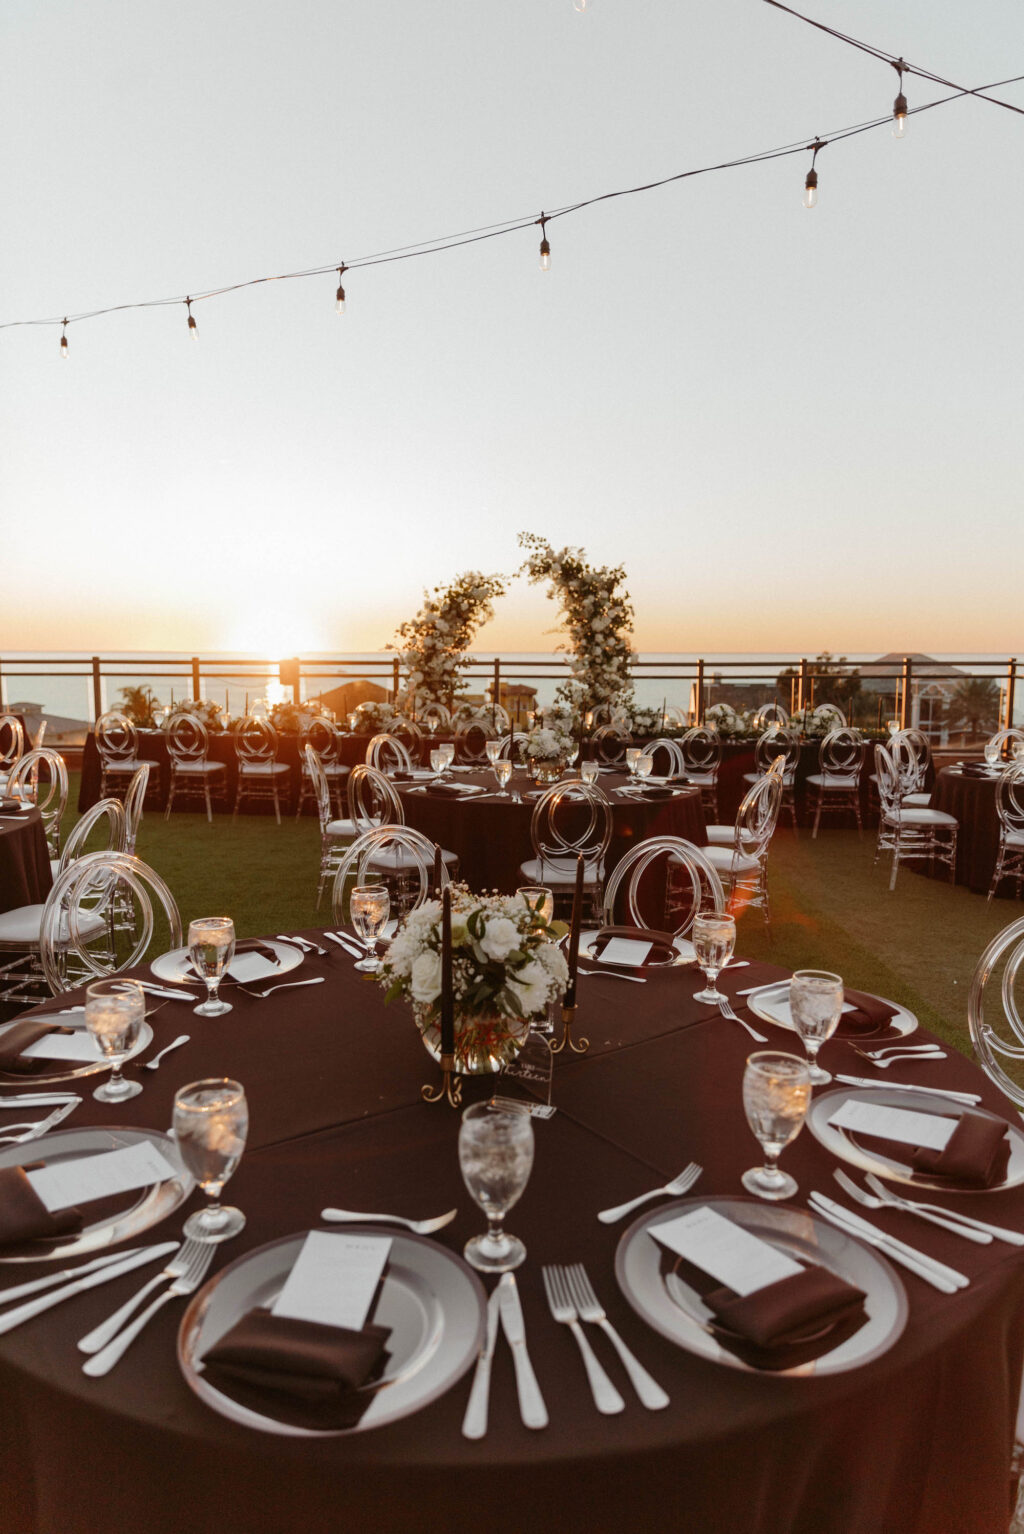 Elegant Rooftop Wedding Reception with Black Linen and Clear Acrylic Infiniti Ghost Chairs with Bistro Lighting Ideas | Rentals Outside the Box Rentals | St. Petersburg Hotel Wedding Hotel Zamora